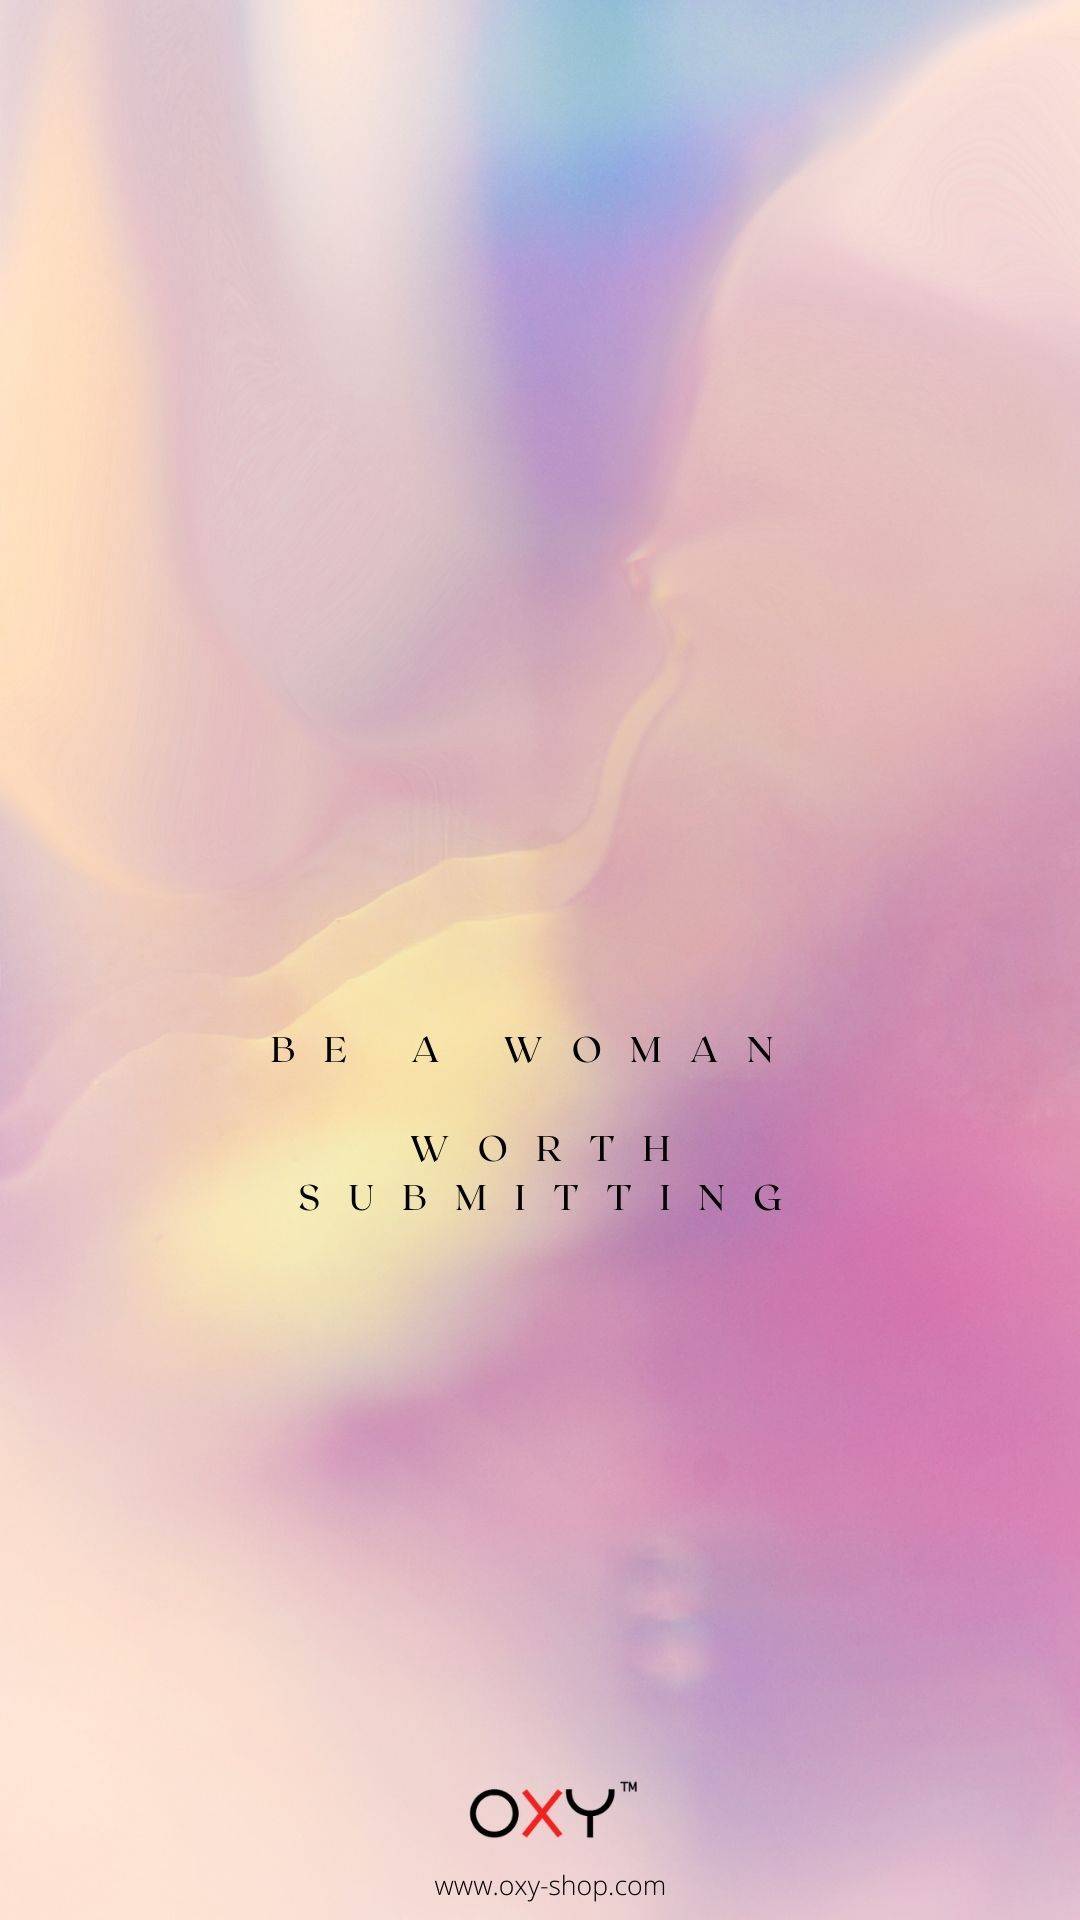 Be a woman worth submitting. - BDSM wallpaper